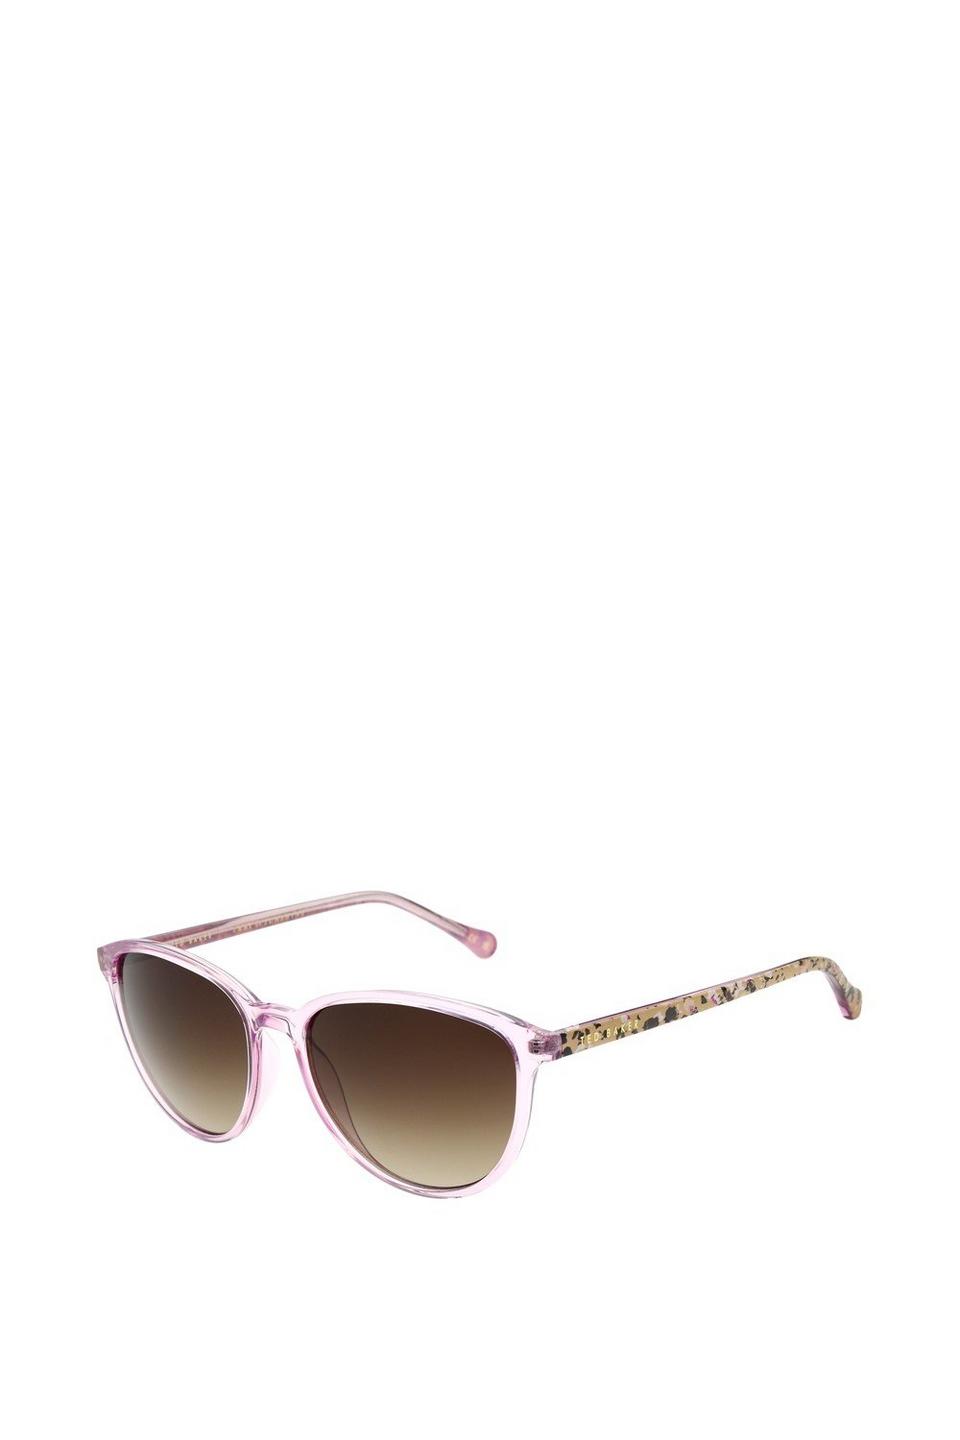 Sunglasses | Tierney Sunglasses | Ted Baker